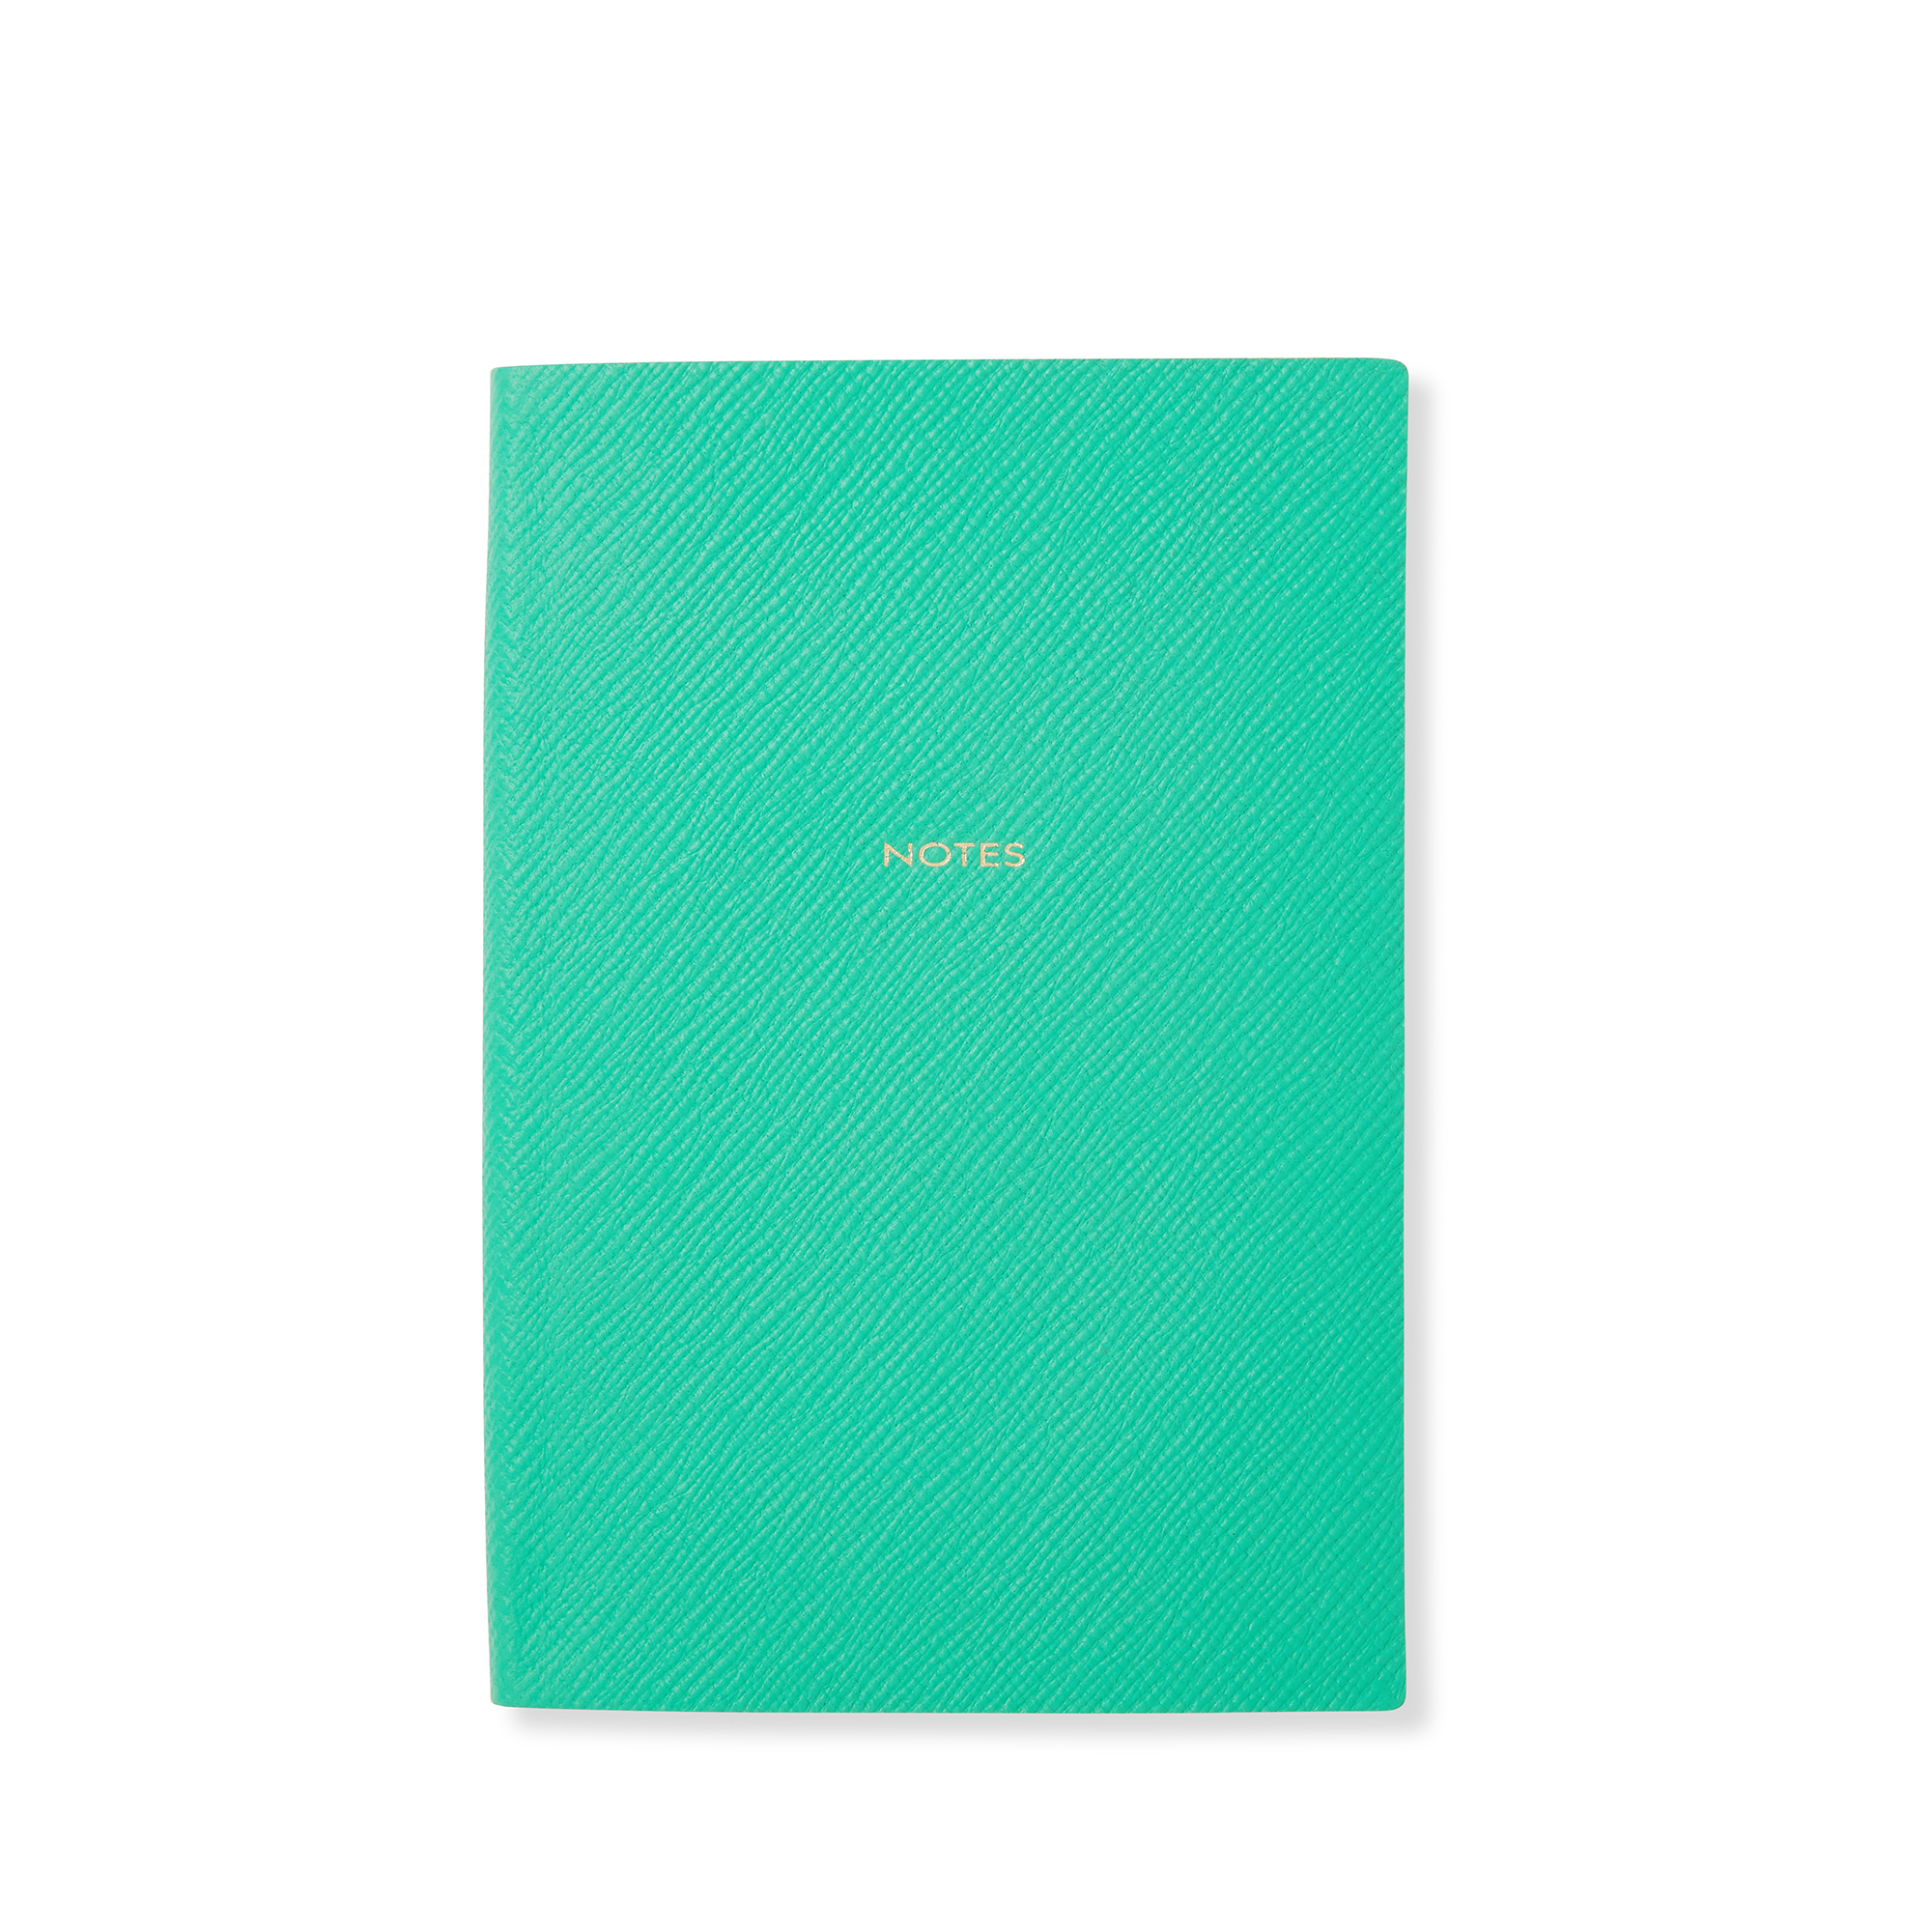 Smythson Notes Chelsea Notebook In Panama In Jade